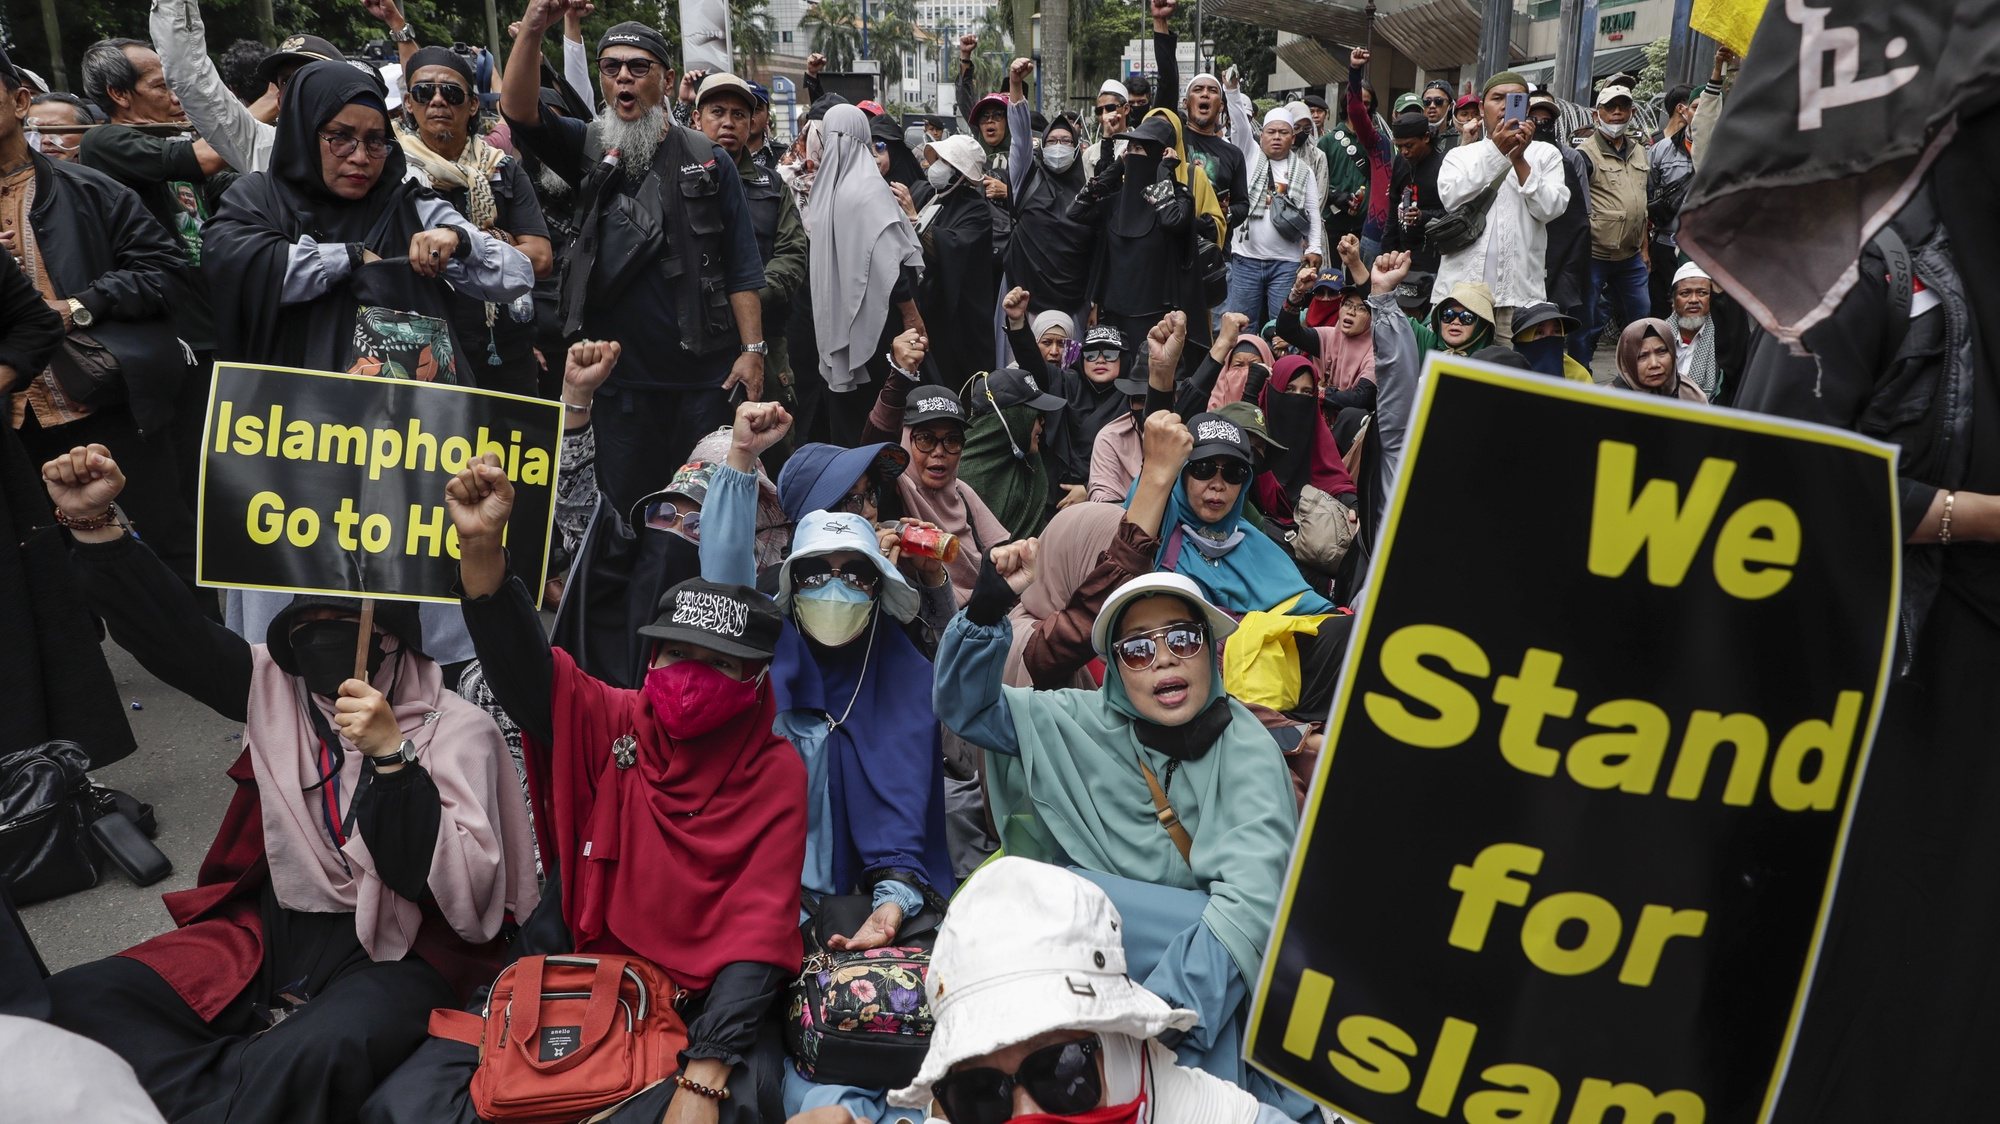 epa10439818 Muslim protesters hold placards and shout slogans during an anti-Sweden rally outside the Swedish embassy in Jakarta, Indonesia, 30 January 2023. Hundreds of protesters staged a rally against the burning of the Koran in Sweden by the Leader of the far-right Danish political party Stram Kurs (Hard Line), Rasmus Paludan, demanding that the Swedish govenrment take actions.  EPA/MAST IRHAM